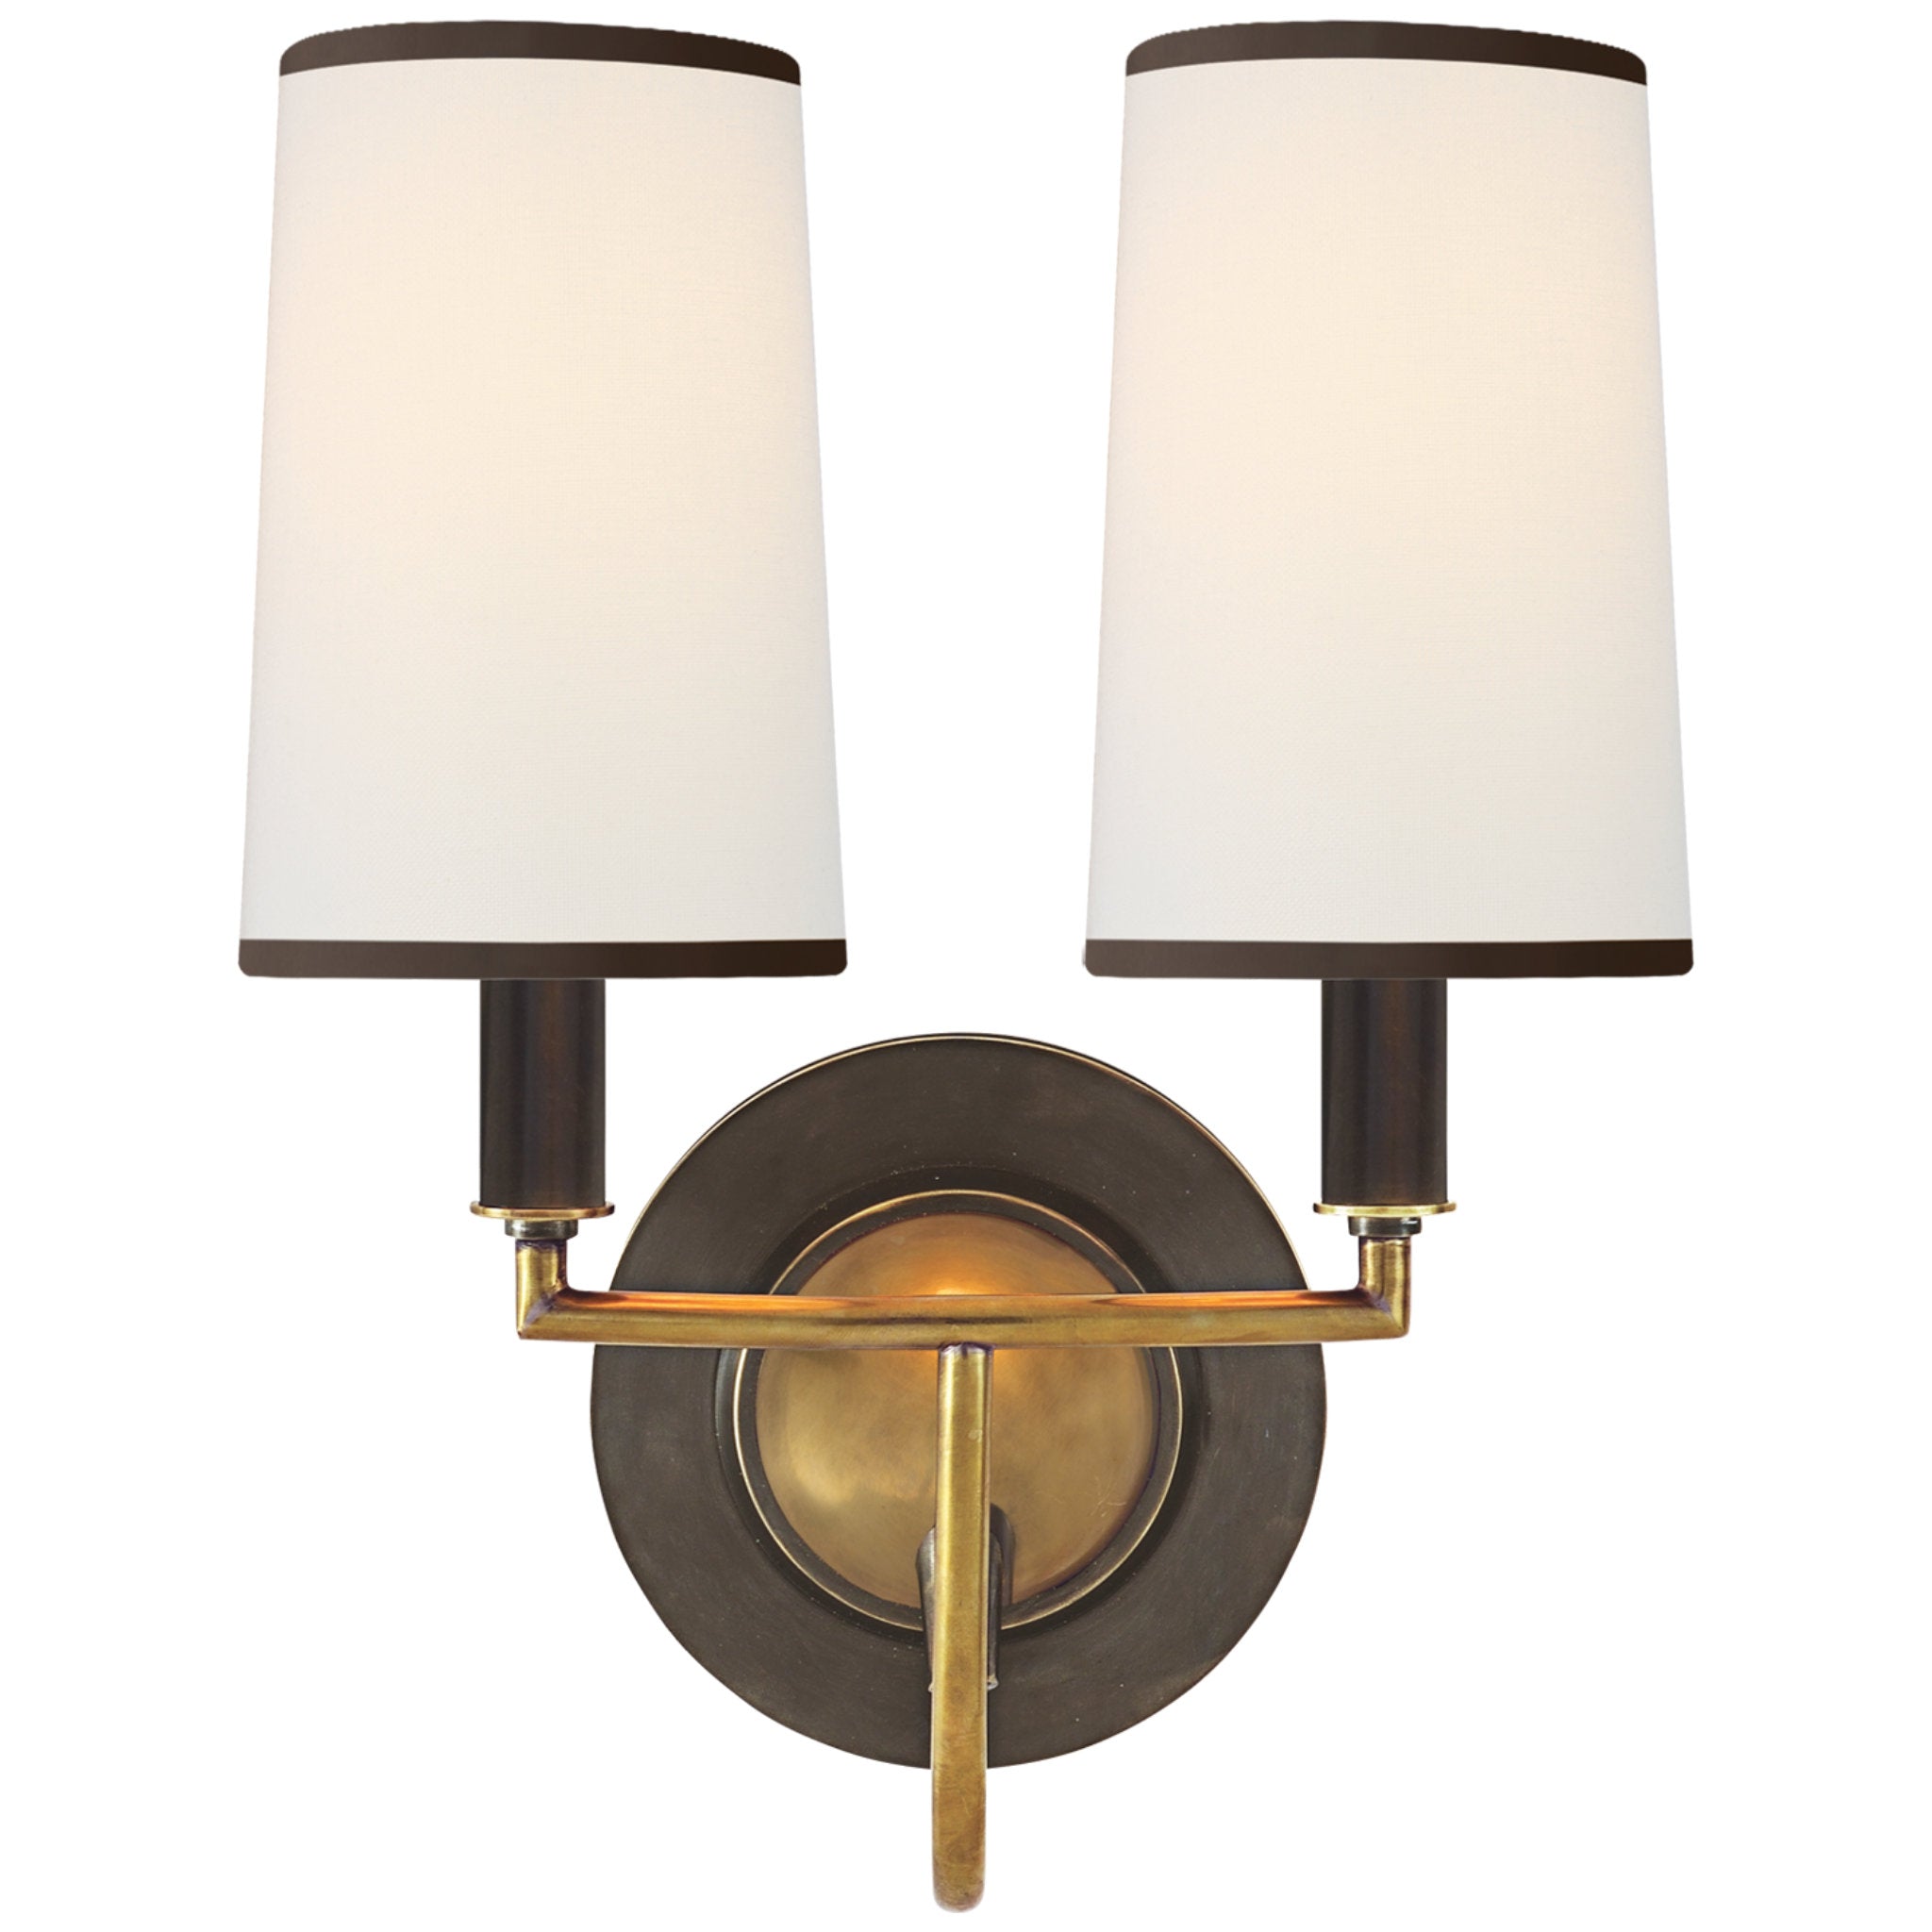 Thomas O'Brien Elkins Double Sconce in Bronze and Hand-Rubbed Antique